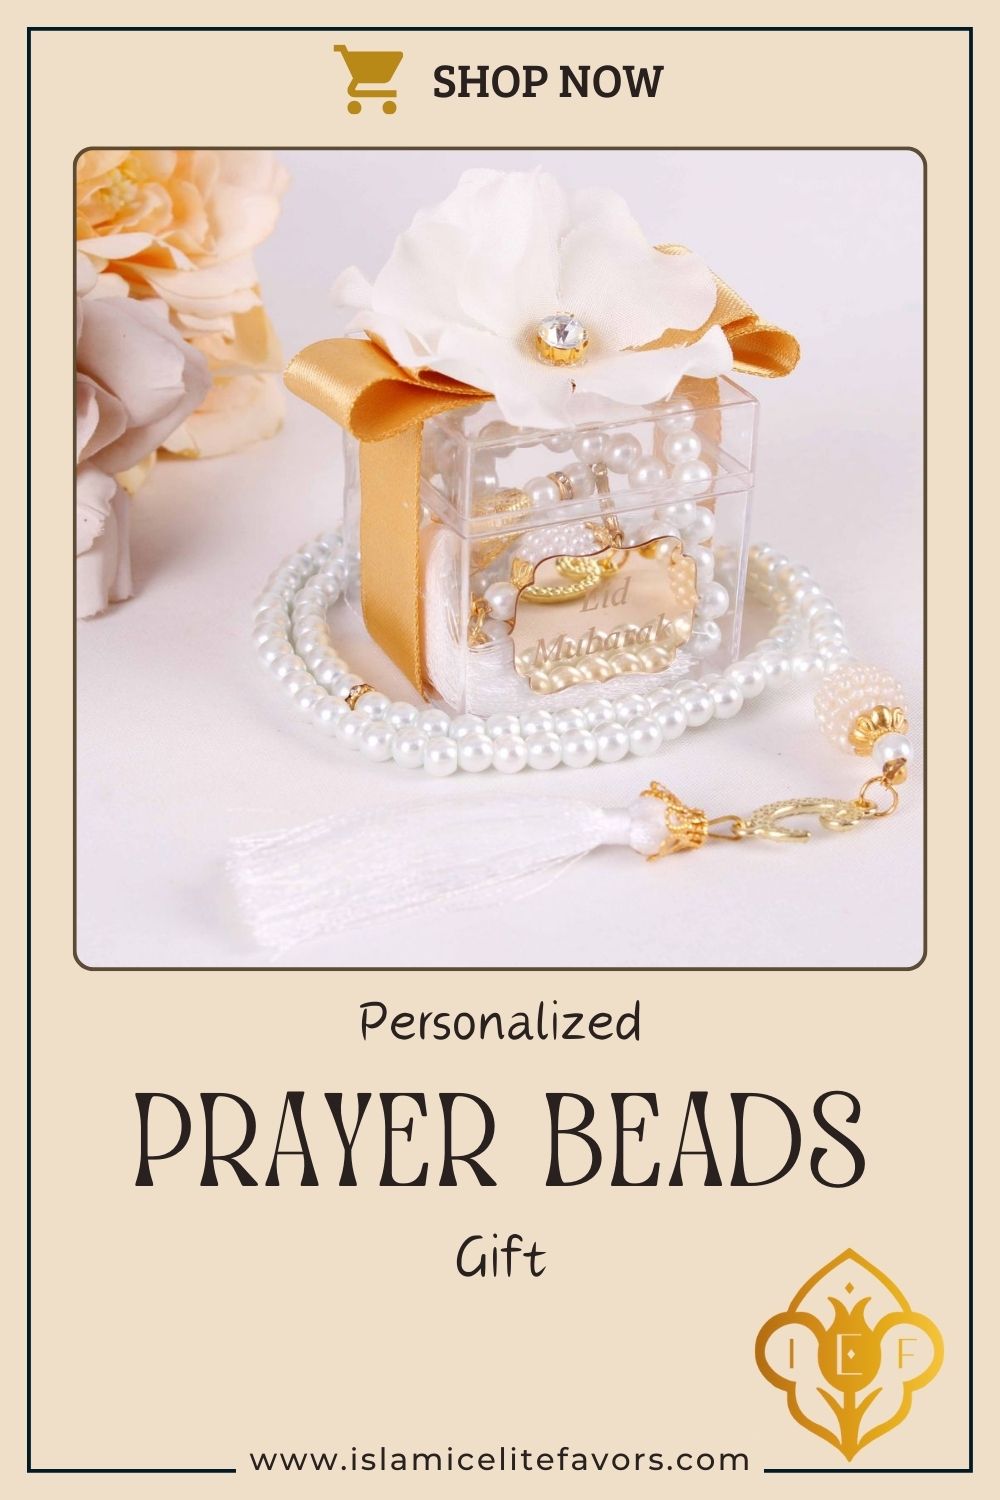 Personalized Prayer Beads Wedding Favor Gift Box Decorated with Flower - Islamic Elite Favors is a handmade gift shop offering a wide variety of unique and personalized gifts for all occasions. Whether you're looking for the perfect Ramadan, Eid, Hajj, wedding gift or something special for a birthday, baby shower or anniversary, we have something for everyone. High quality, made with love.